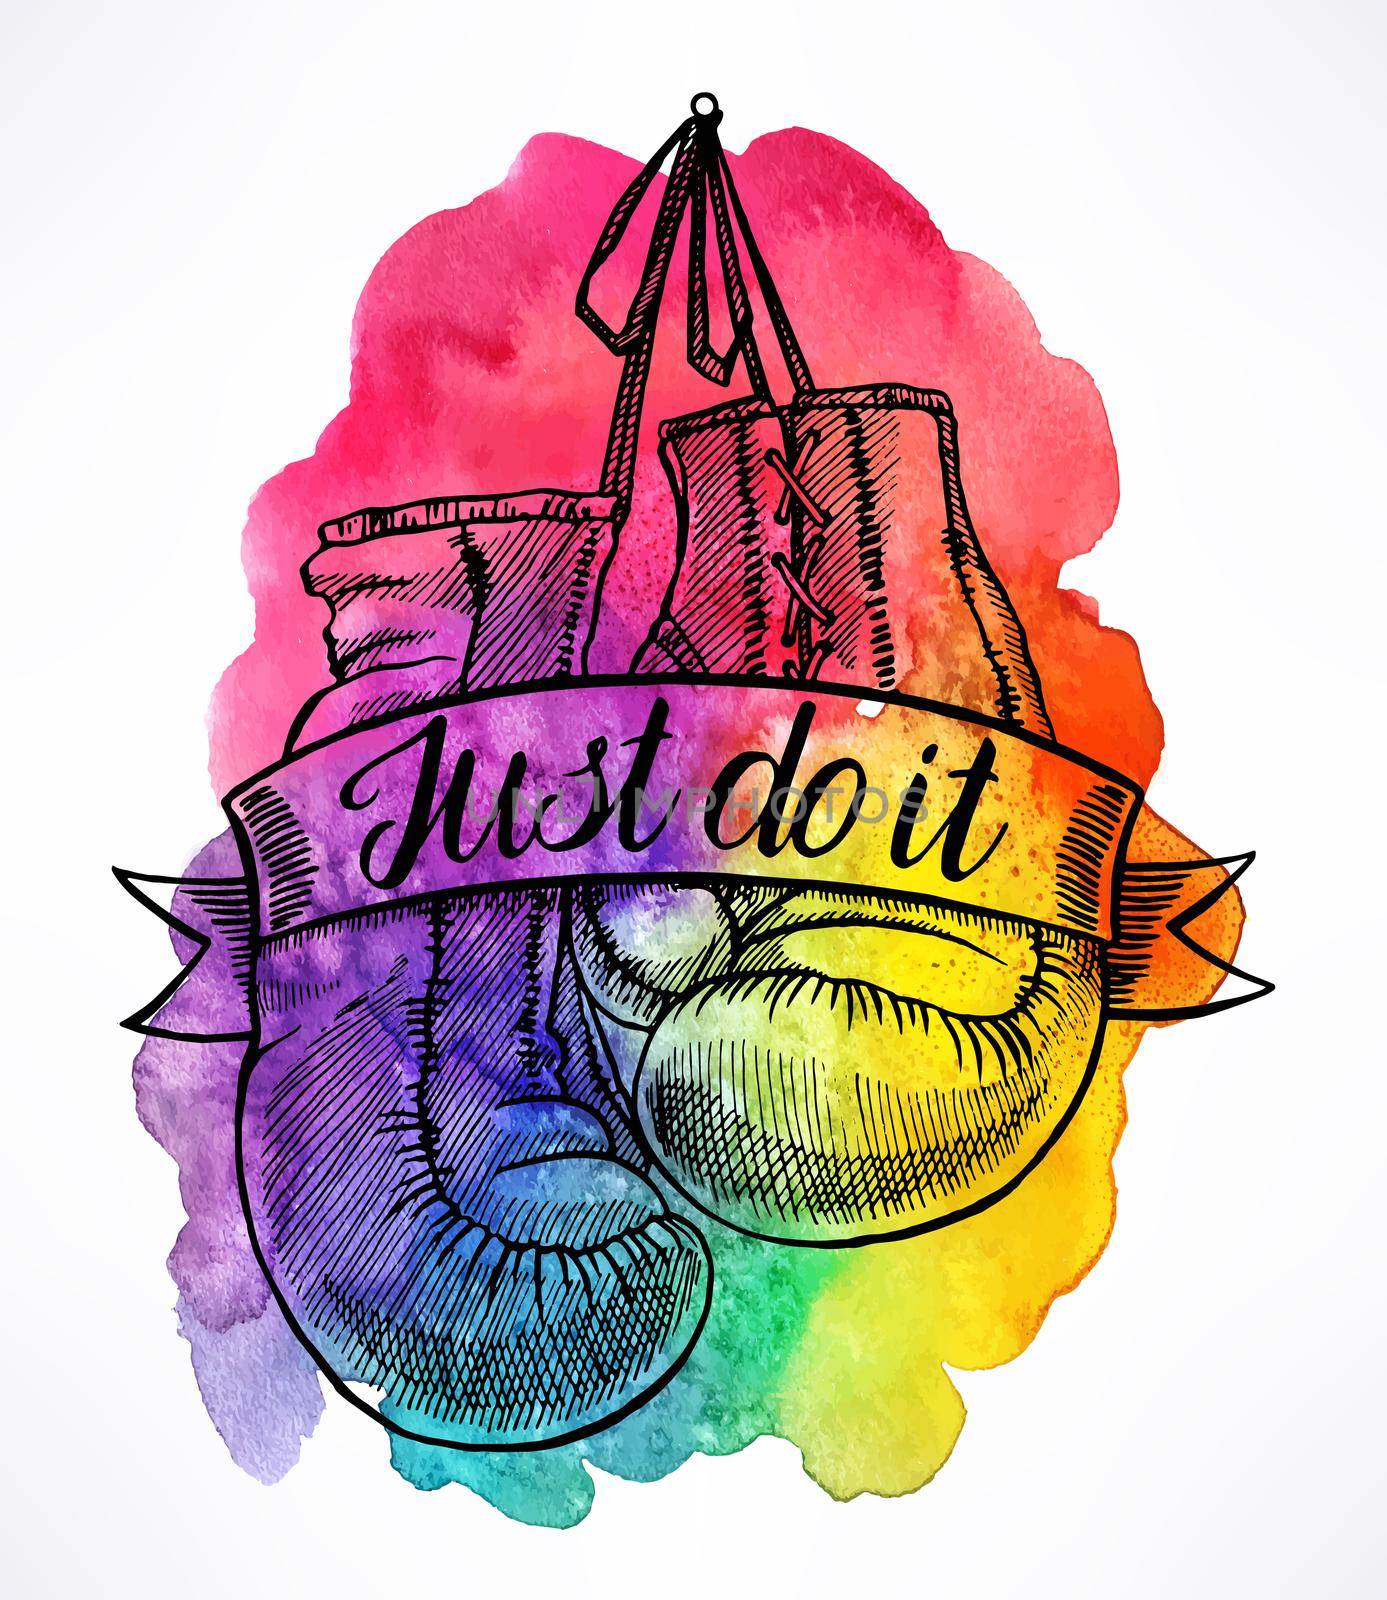 just do it. boxing gloves on a colorful watercolor background. hand-drawn illustration